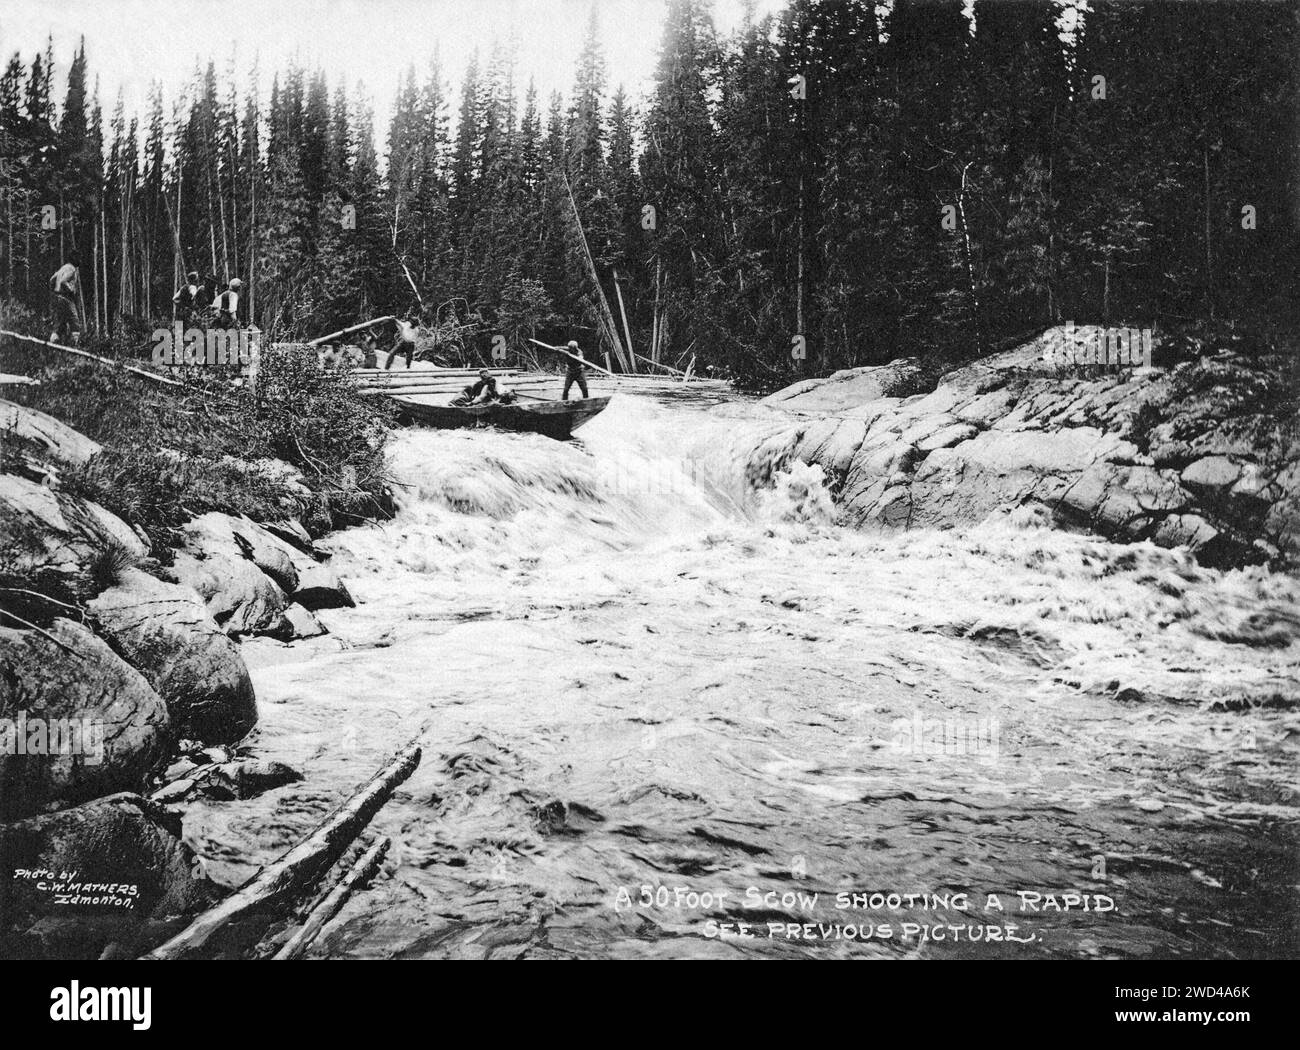 A 1901 photograph of a flat-bottomed cargo scow, being run down through rapids on a side channel of the Slave River in Alberta/Northwest Territories, taken by C W Mathers on an expedition to the far north of Canada and published in his book ‘The Far North’. Mathers captioned this photograph: A 50 foot scow shooting a rapid. See previous picture [Alamy image: 2WD4A6F]. Stock Photo